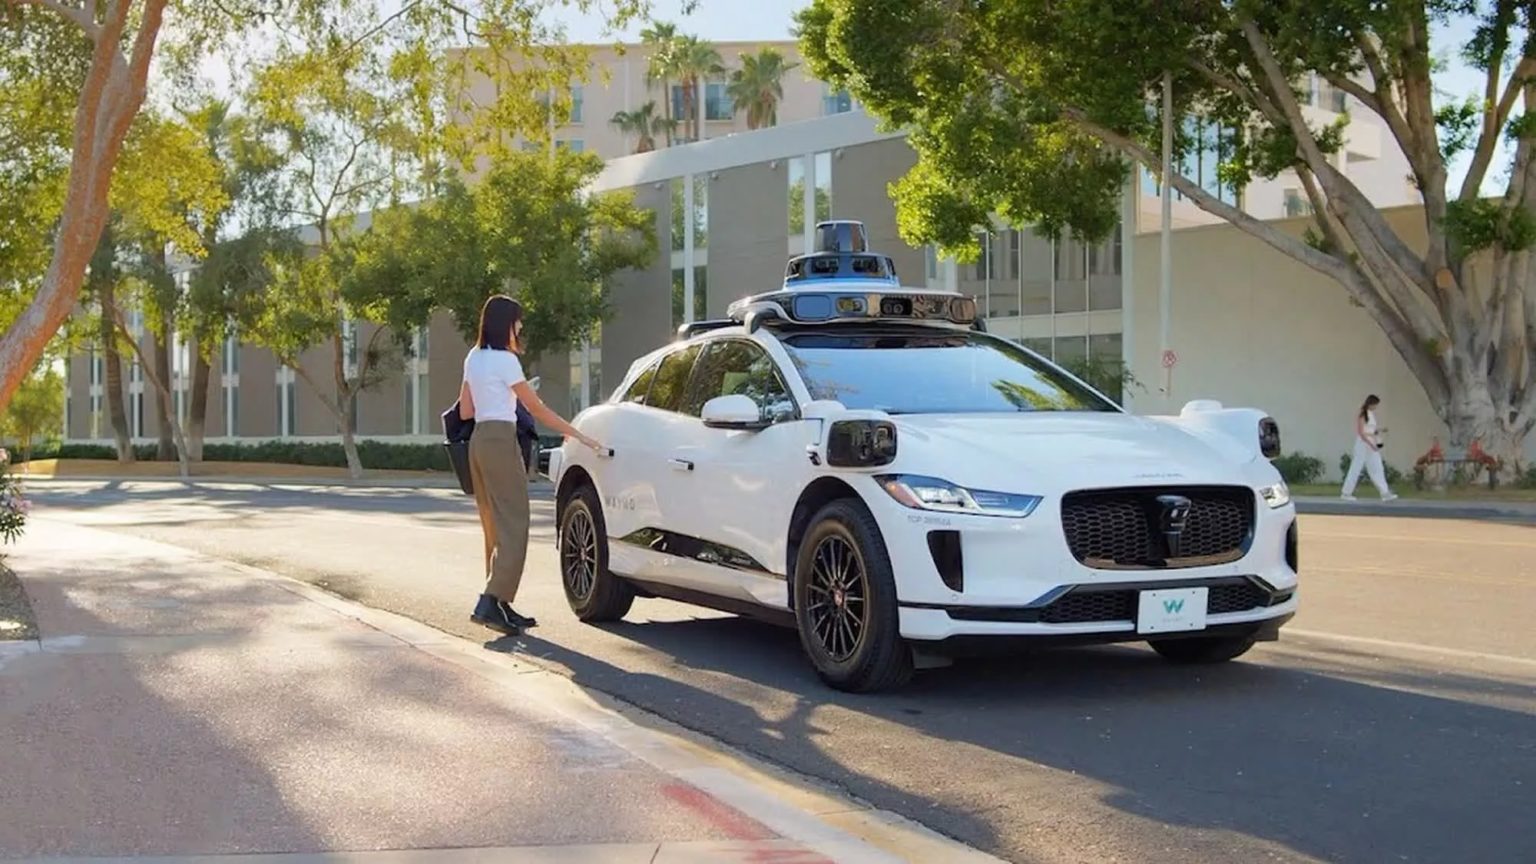 Man arrested for allegedly trying to steal a Waymo autonomous car